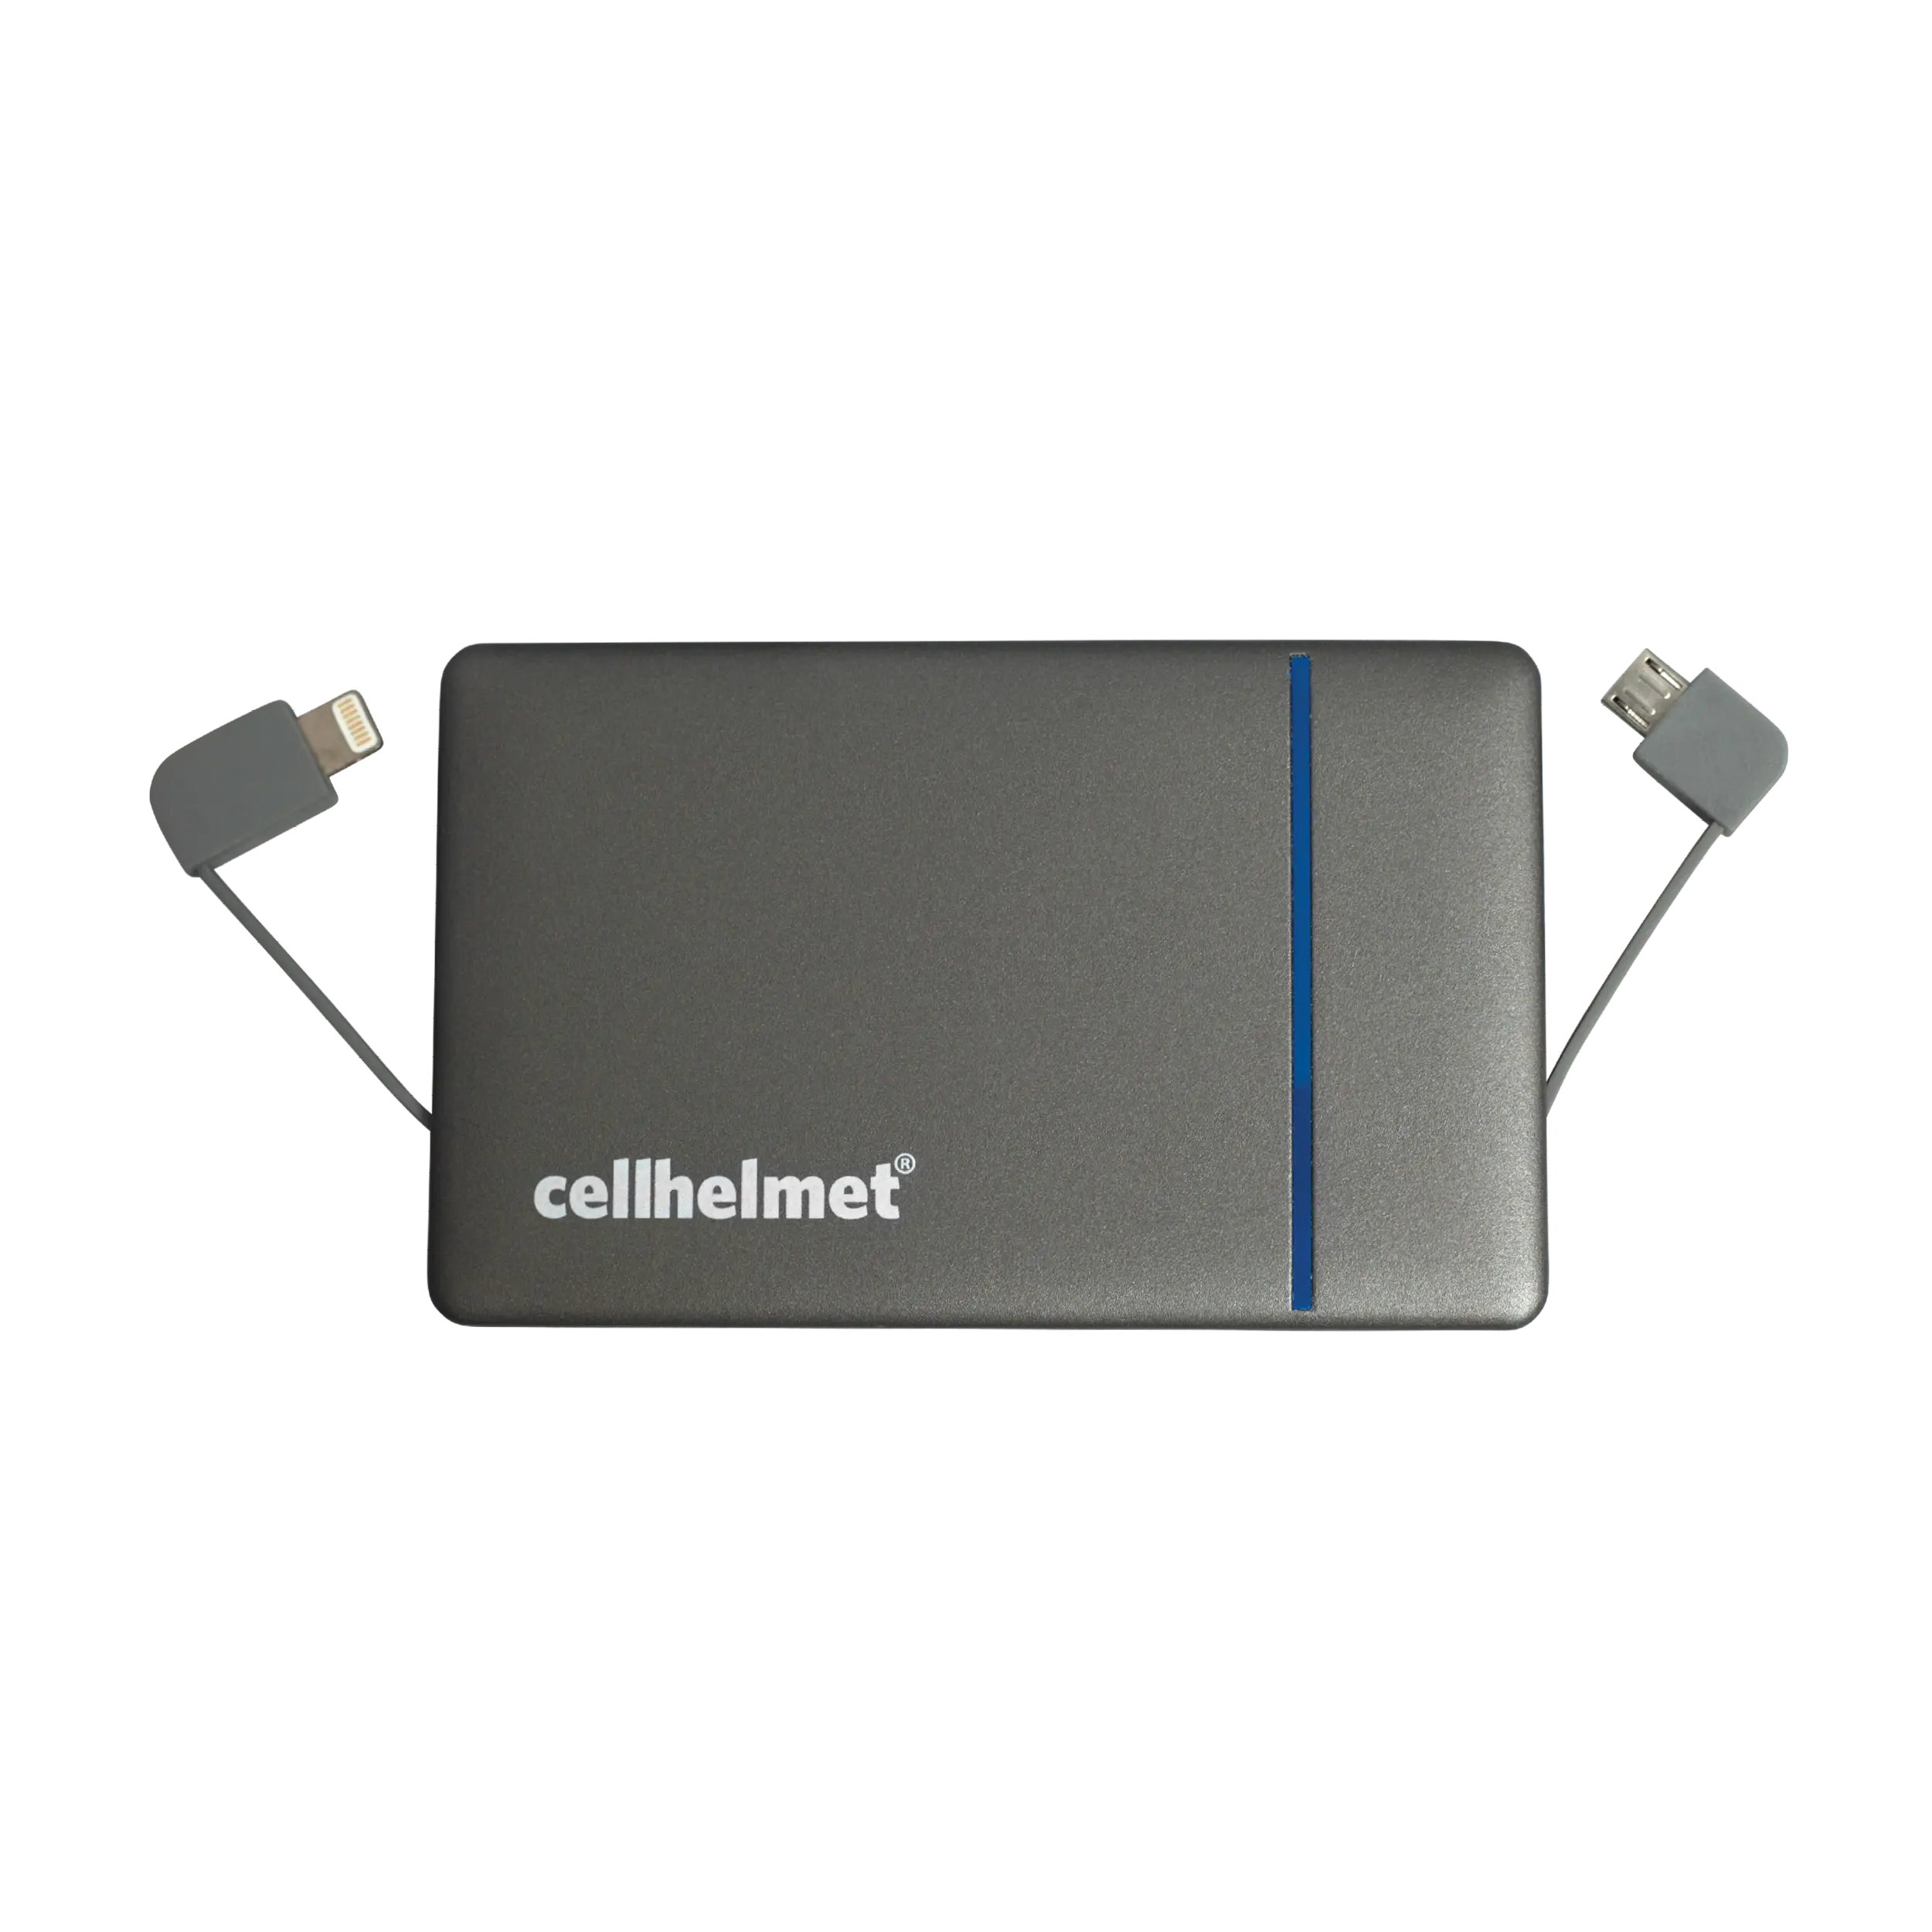 Small Power Bank for iPhone by cellhelmet